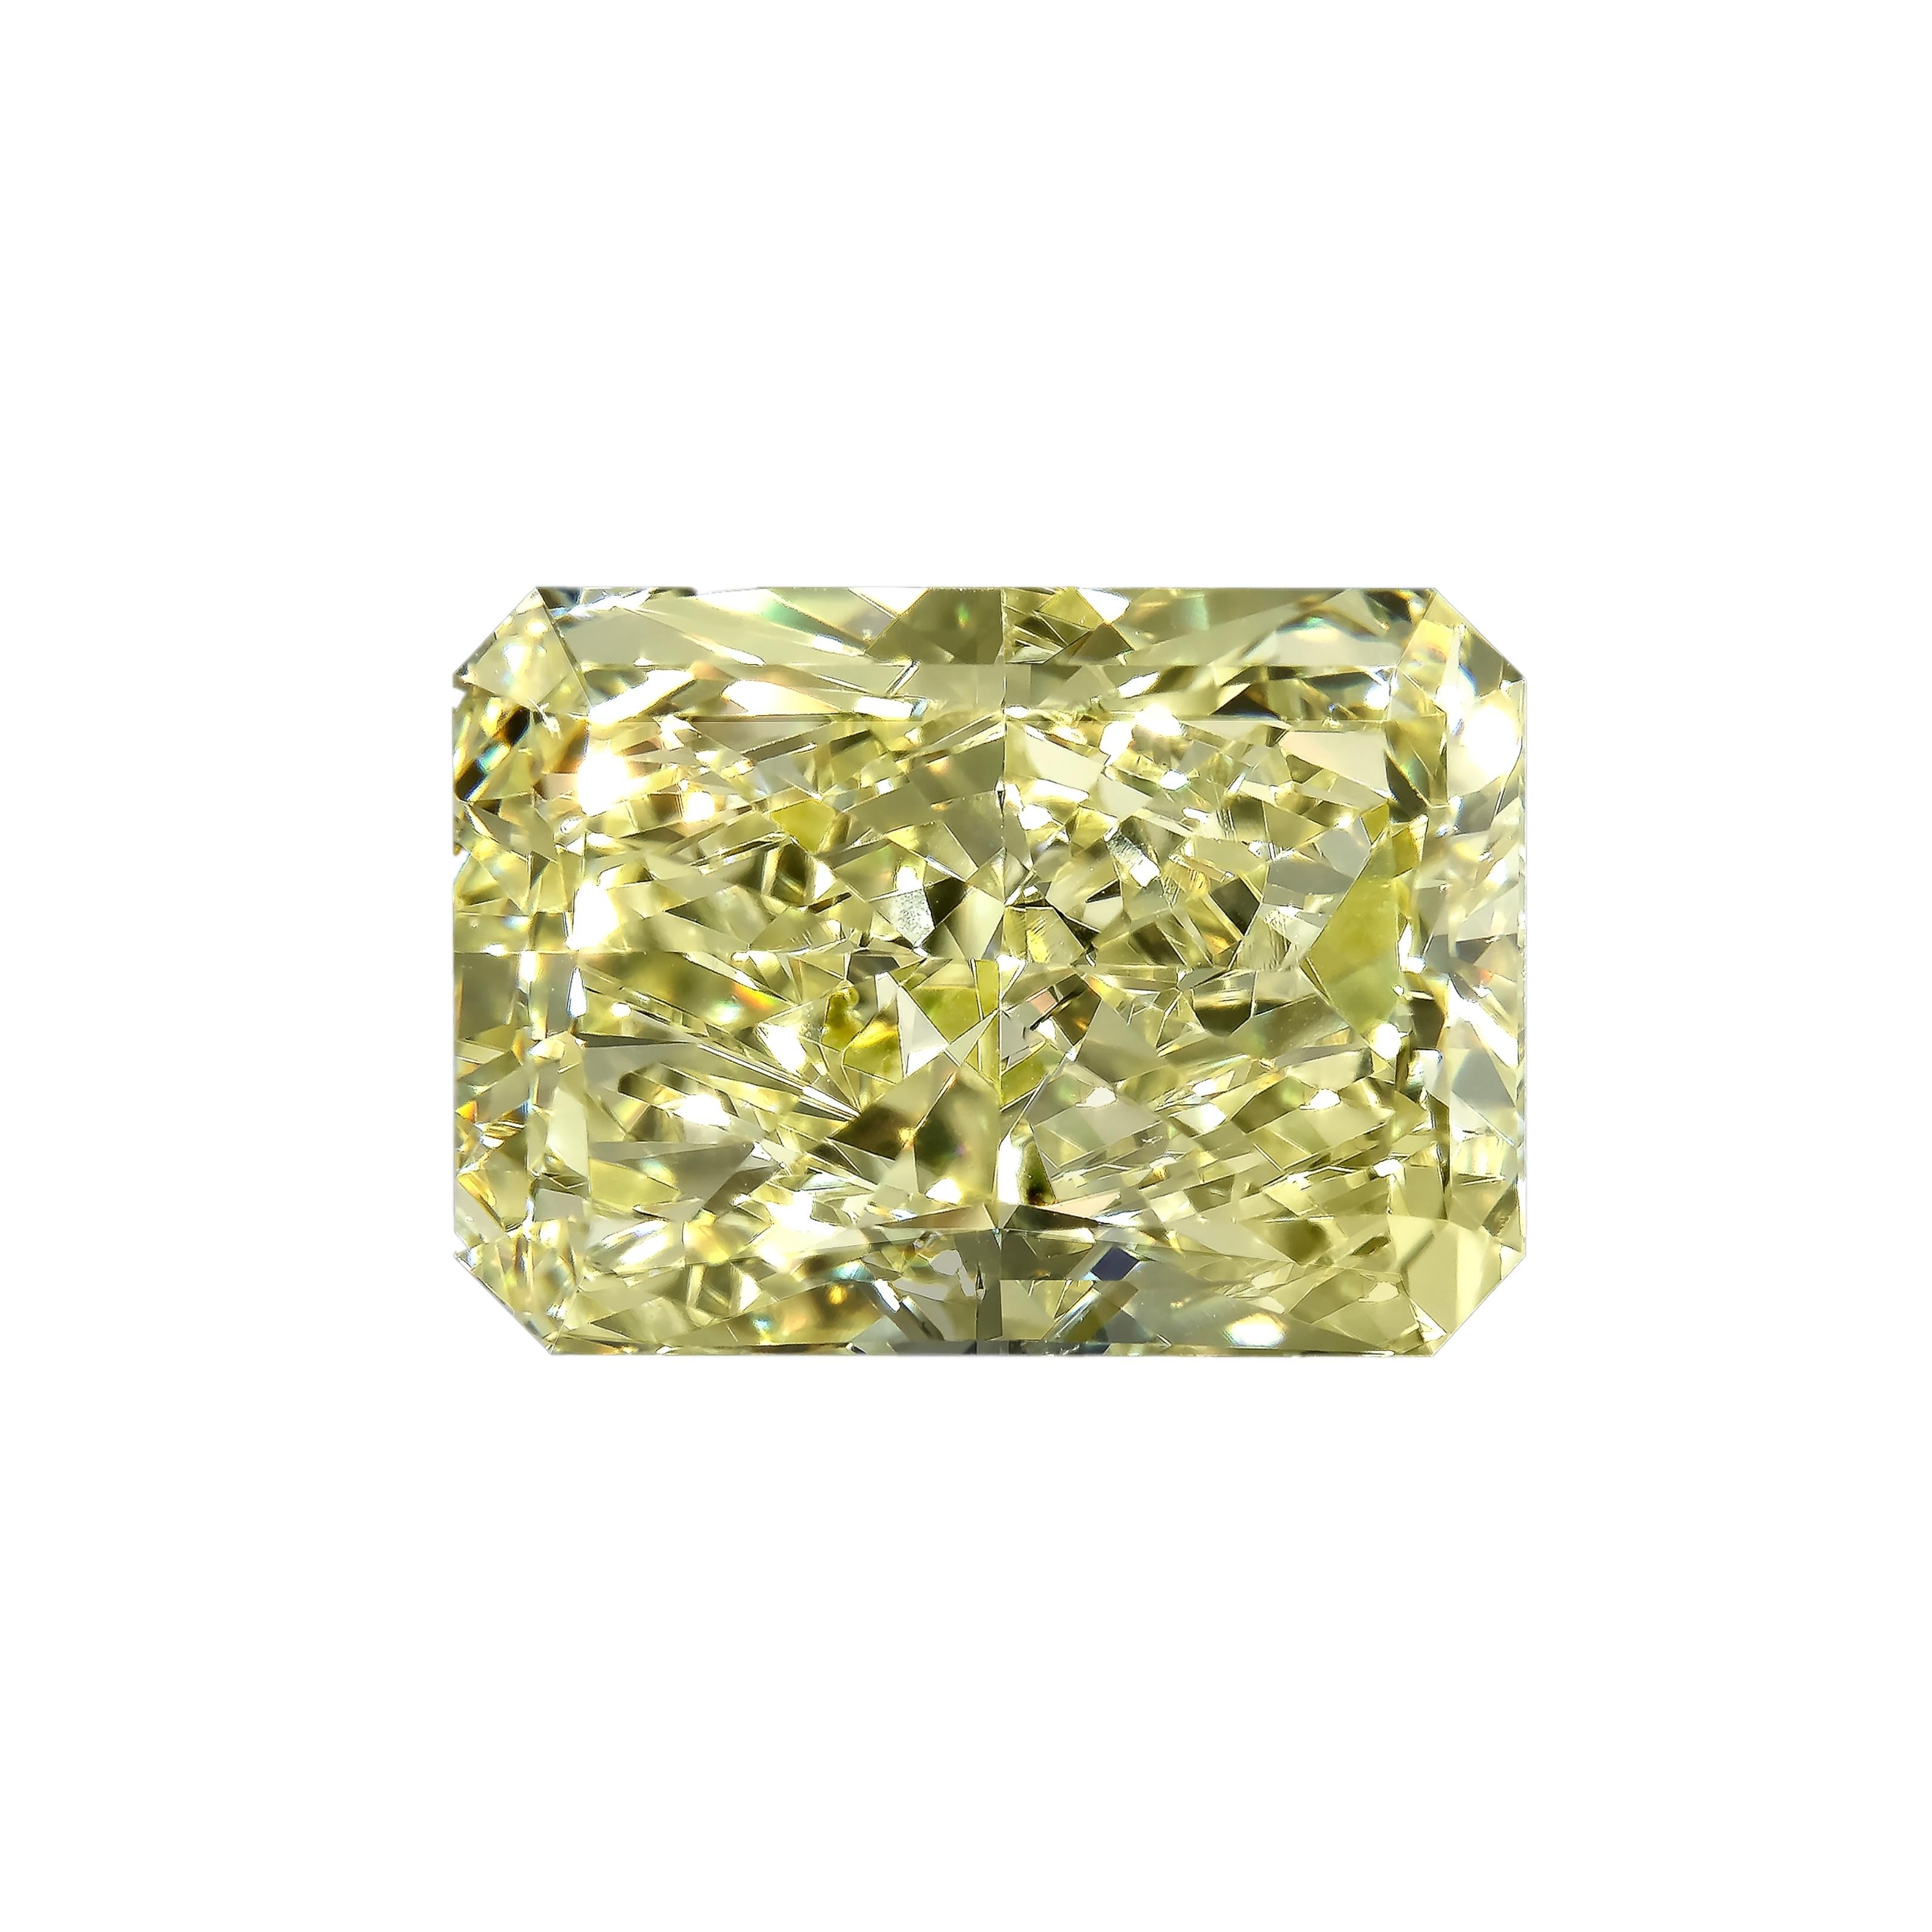 Women's or Men's GIA Certified 3.02 Carat Radiant Cut Yellow Diamond Ring For Sale